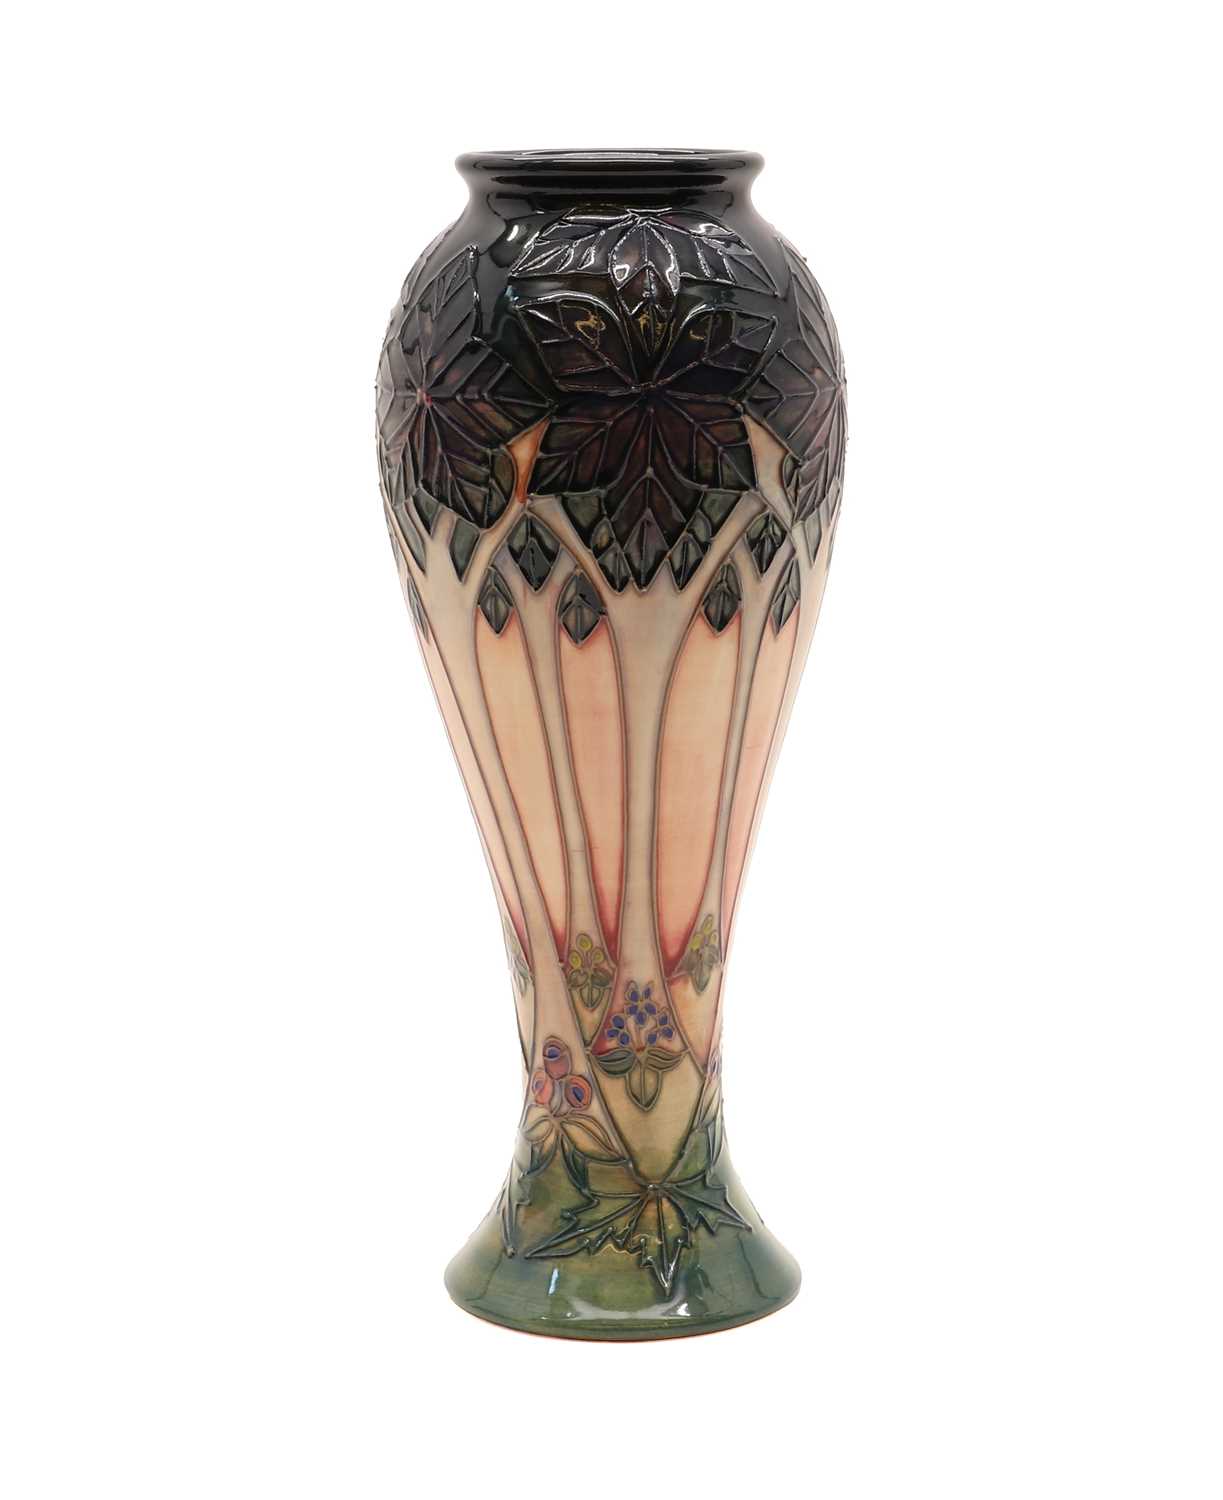 A Guide to Moorcroft Pottery: History, Patterns, and Prices